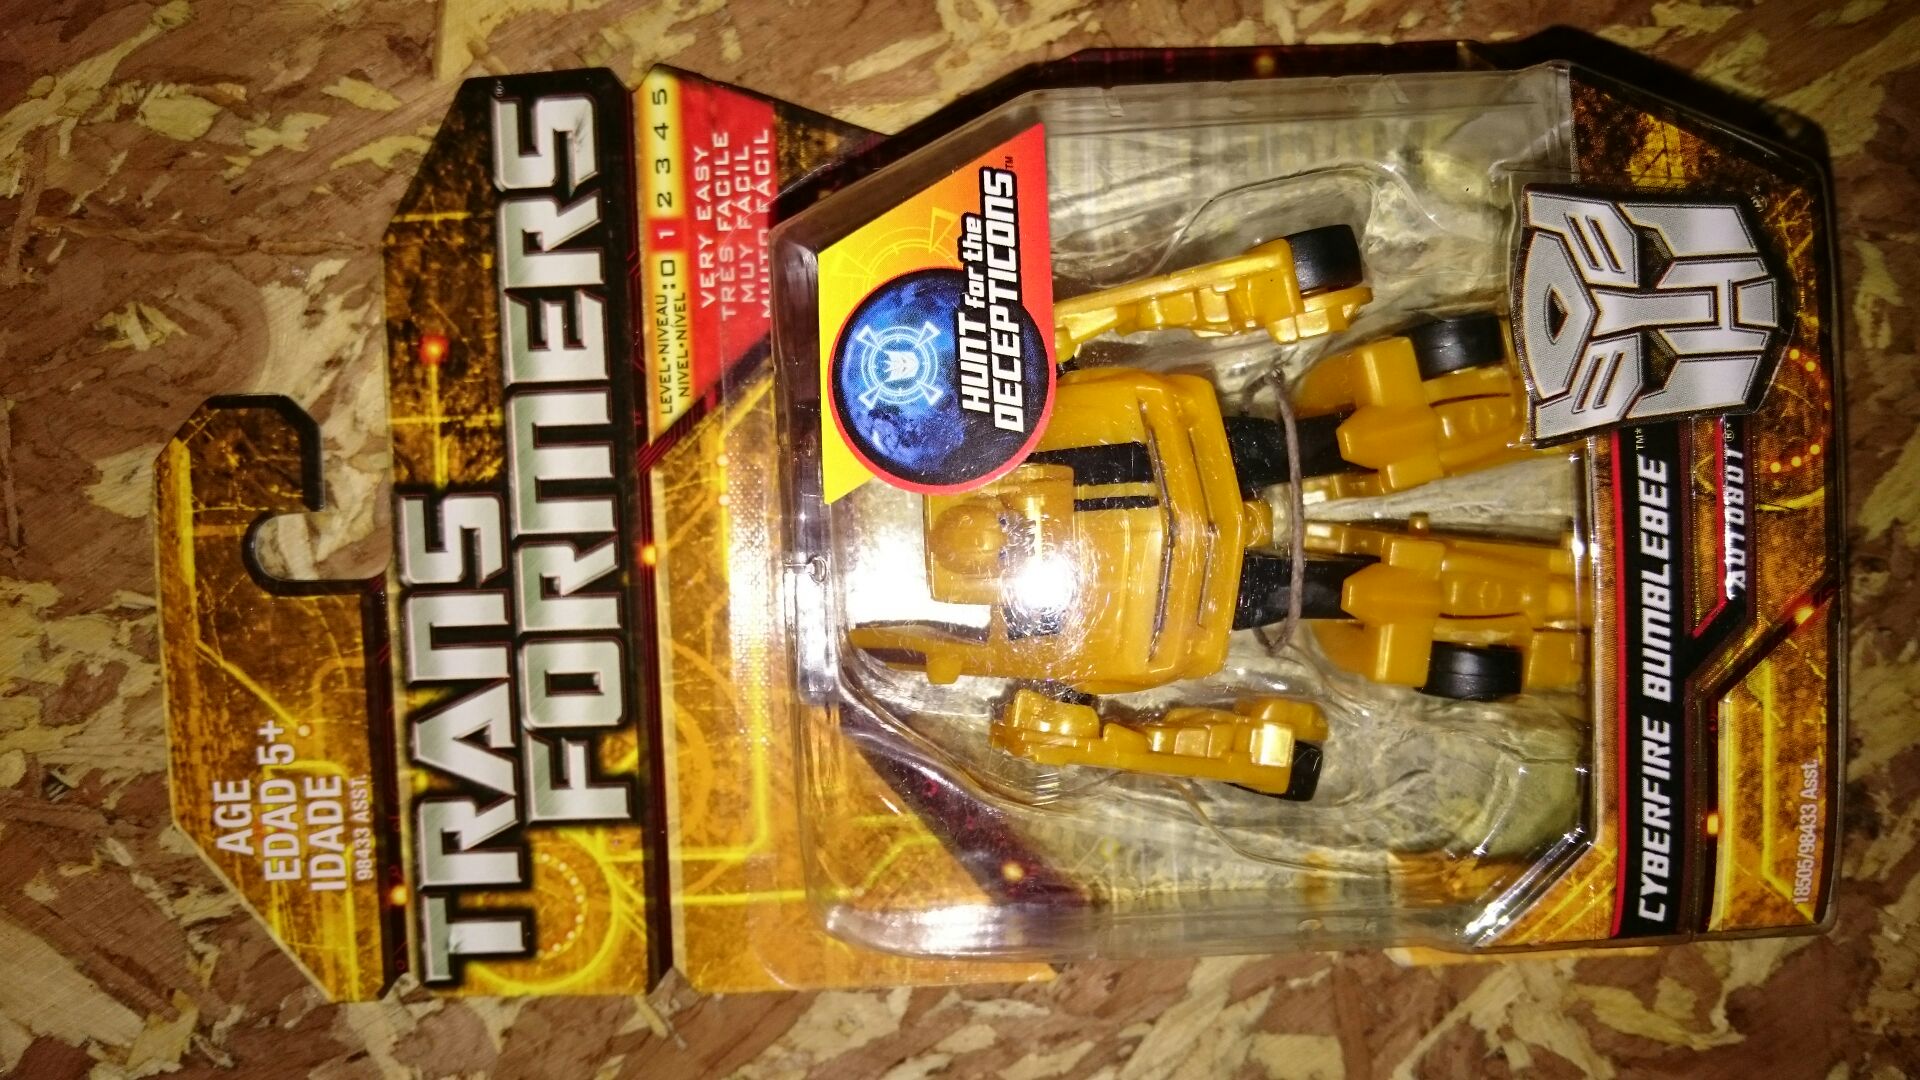 Cyberfire Bumblebee - Hasbro (Transformers: Hunt for The Decepticons) action figure collectible [Barcode 653569490890] - Main Image 1